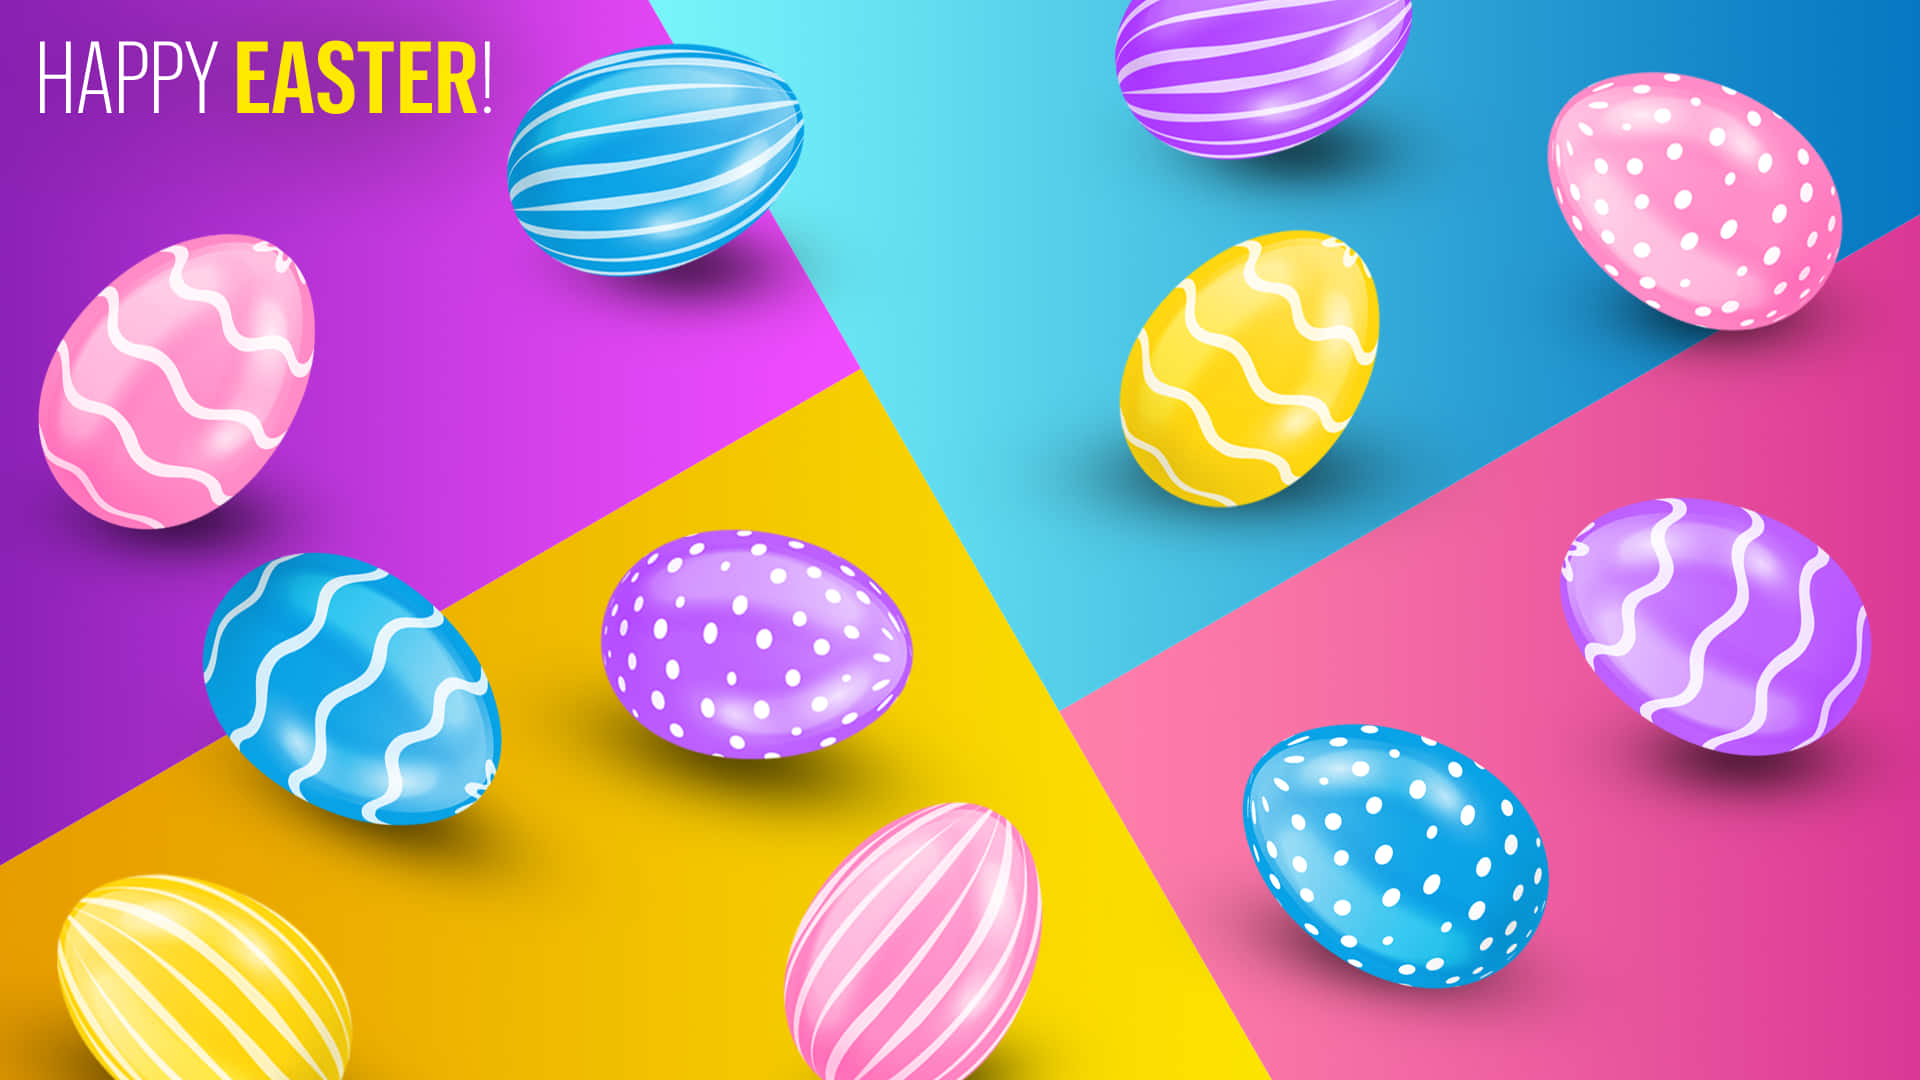 Join the celebration. Easter on Zoom is the perfect way to stay connected with your loved ones.